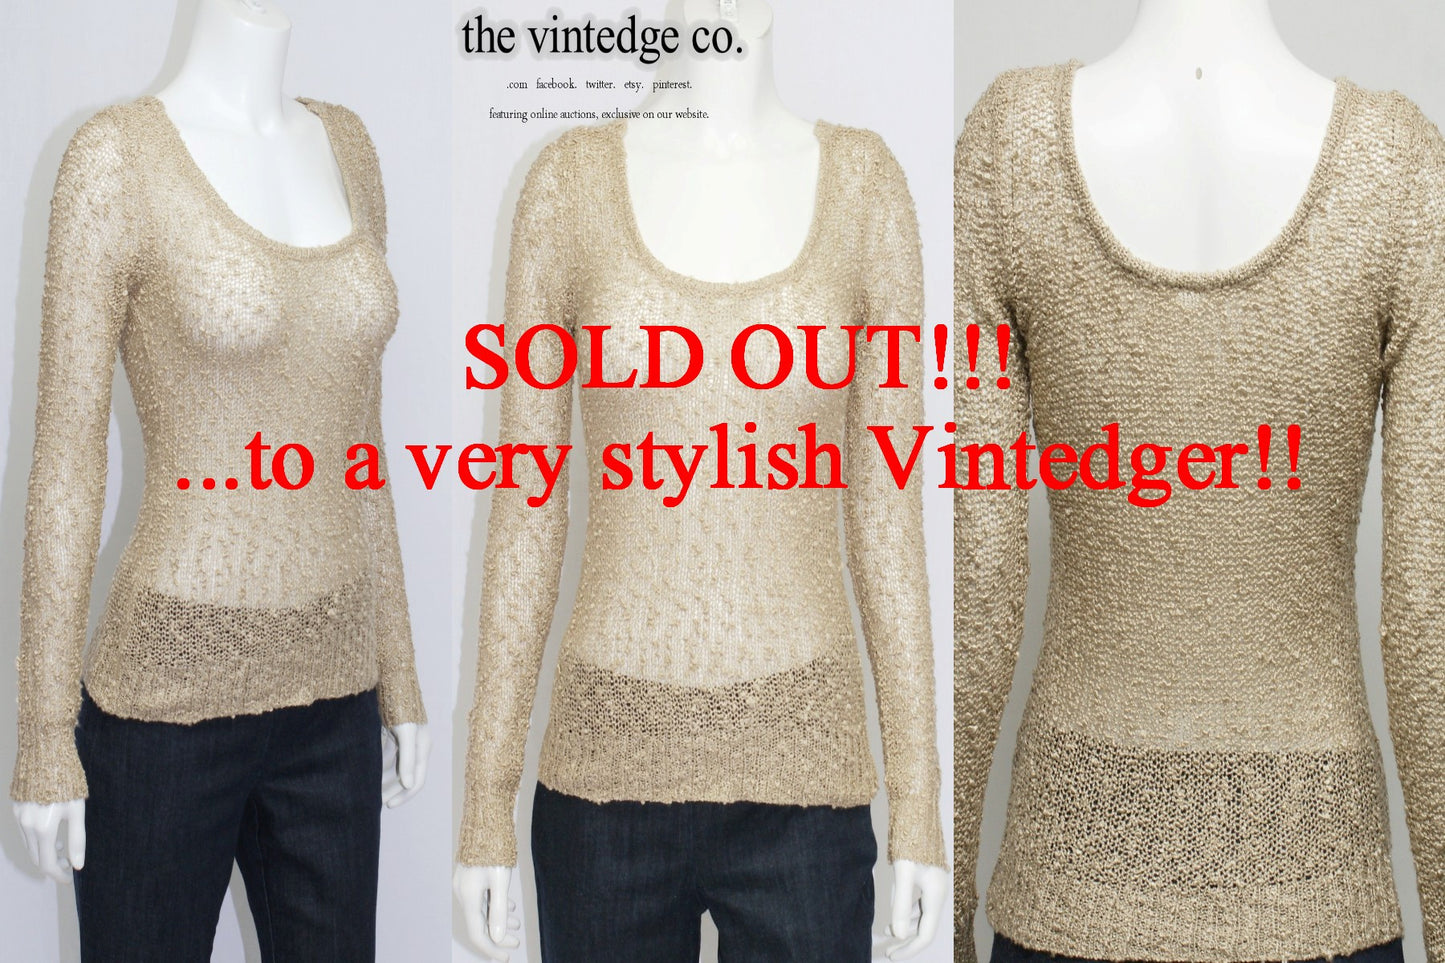 SOLD - Vintage Sweater The Vintedge Co.